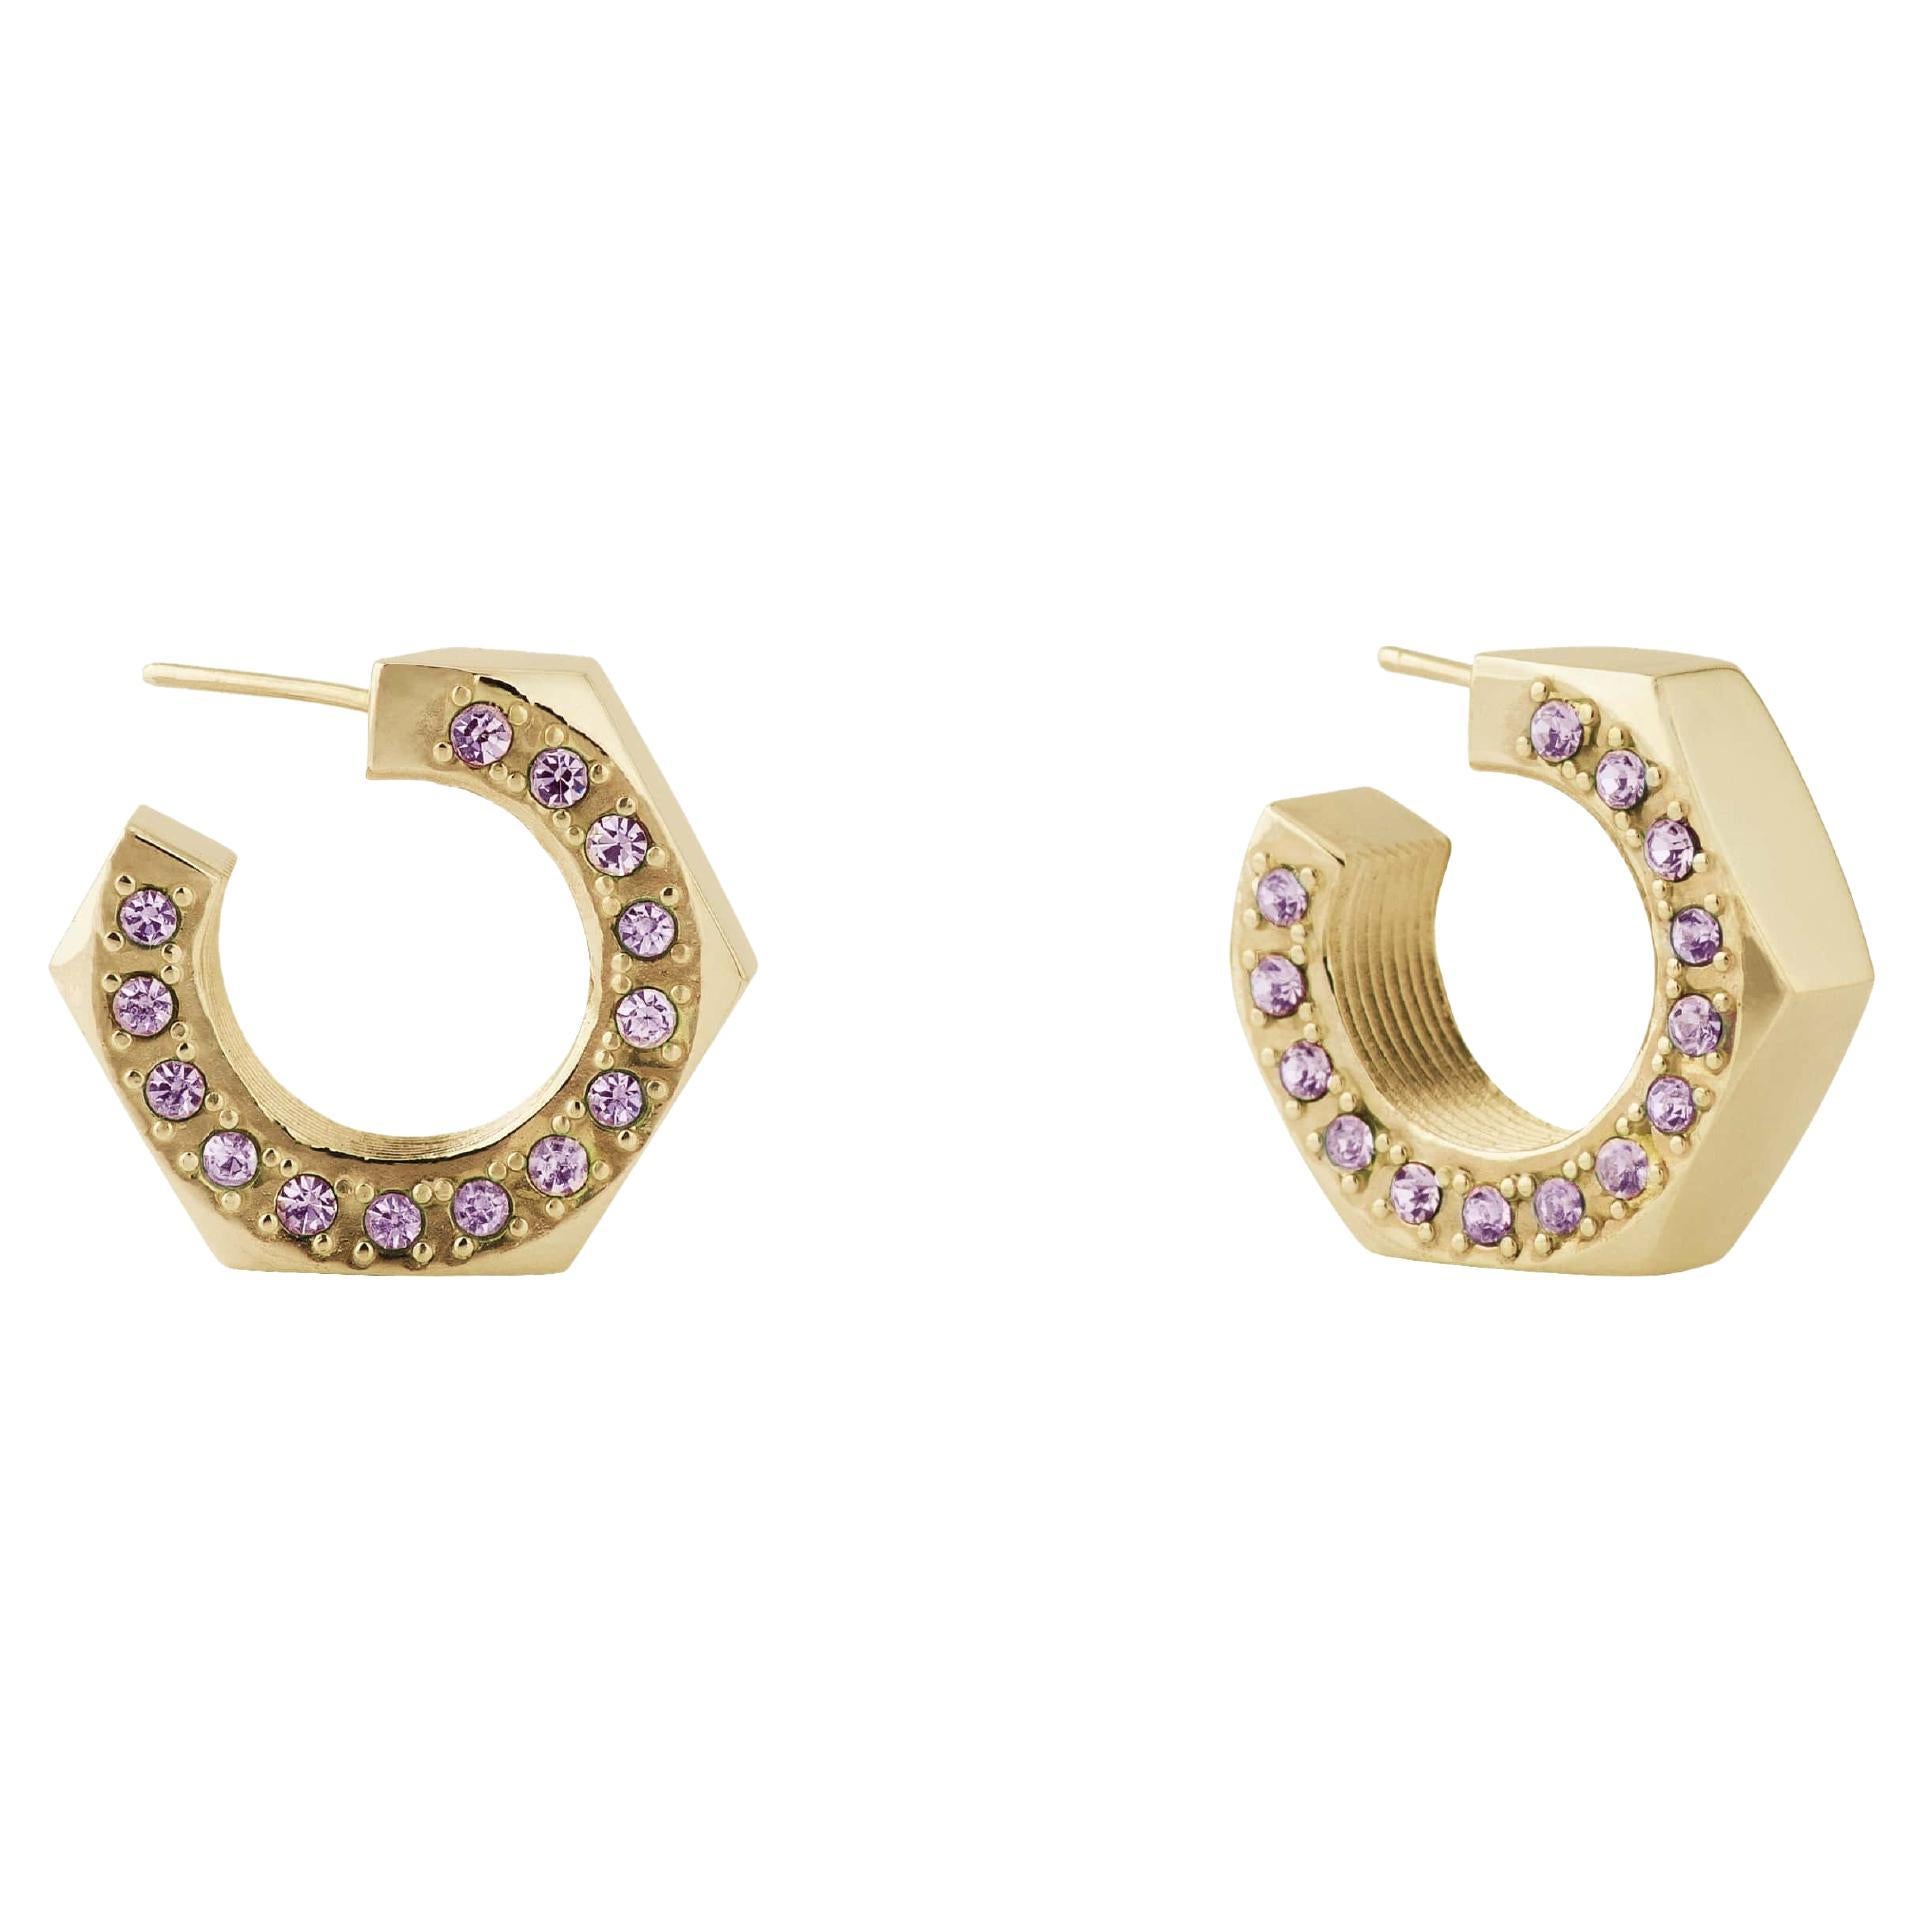 Big Gold Plated Silver Hoop Earrings with Natural Amethyst Stones on the Side For Sale